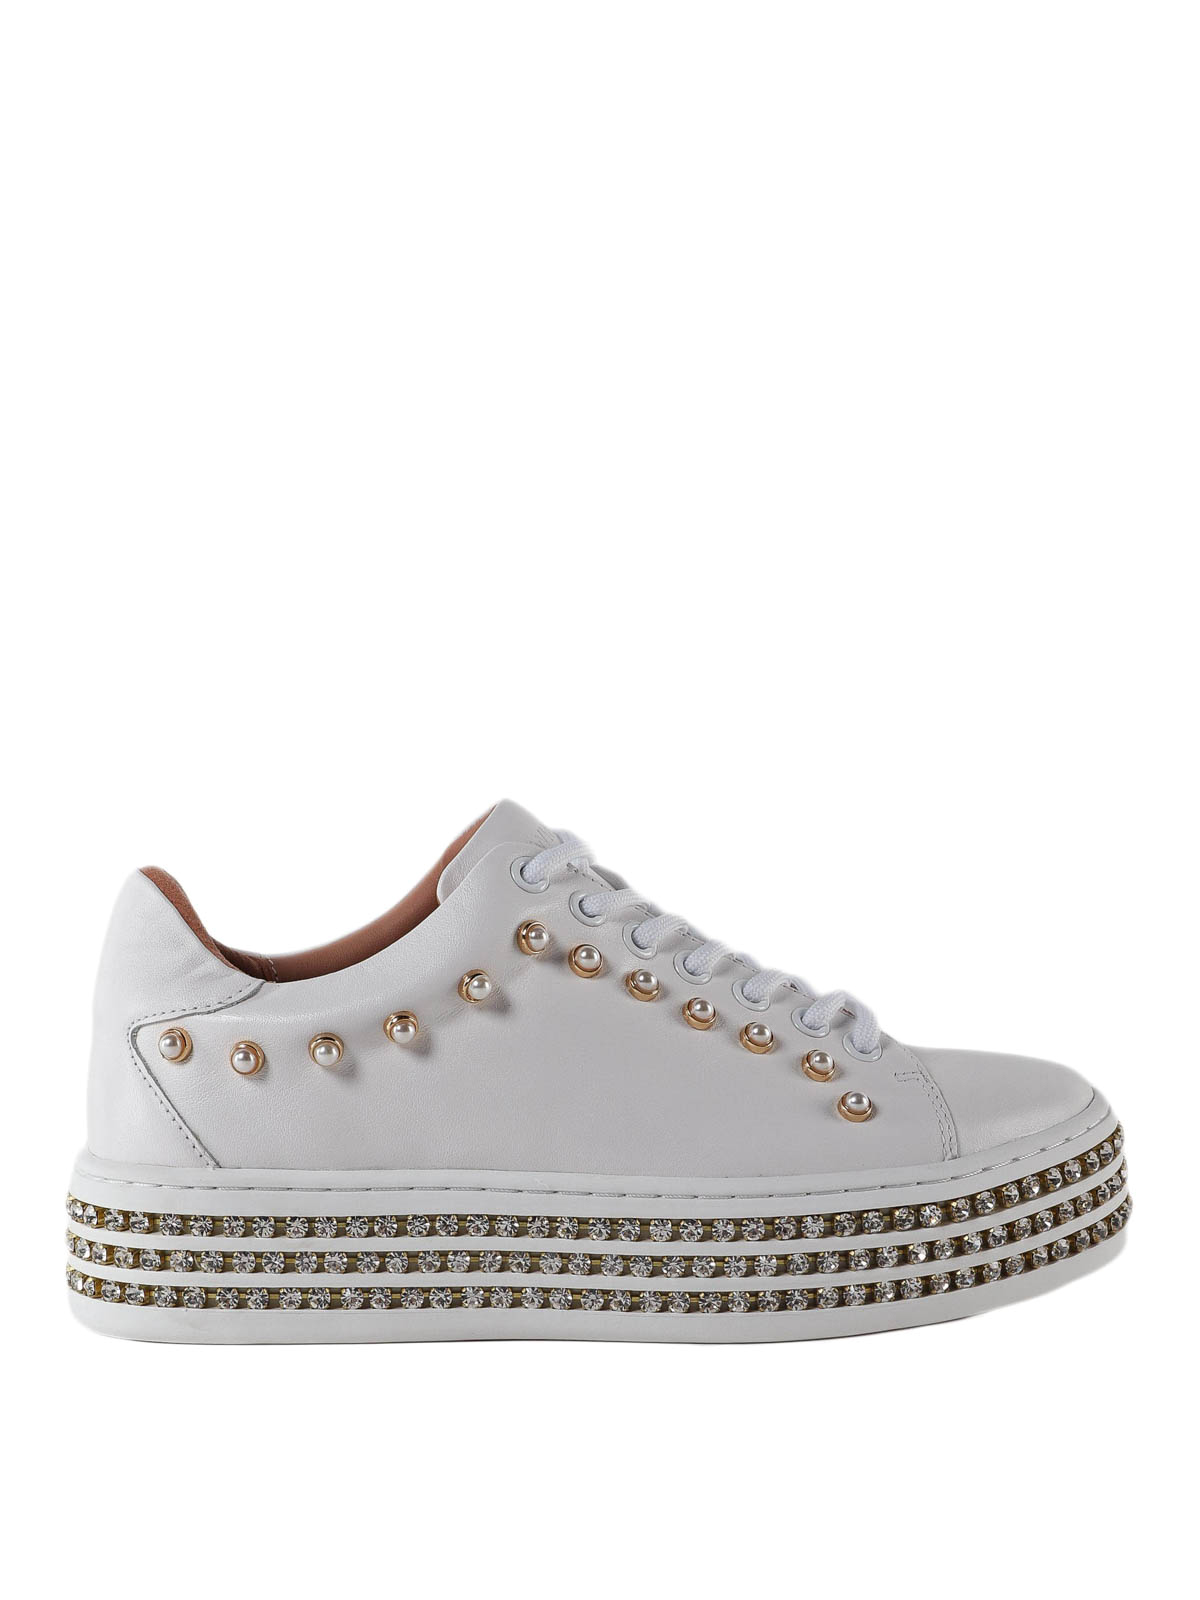 Twinset - Sneaker bianche in pelle con strass e perle - sneakers -  191TCP166001